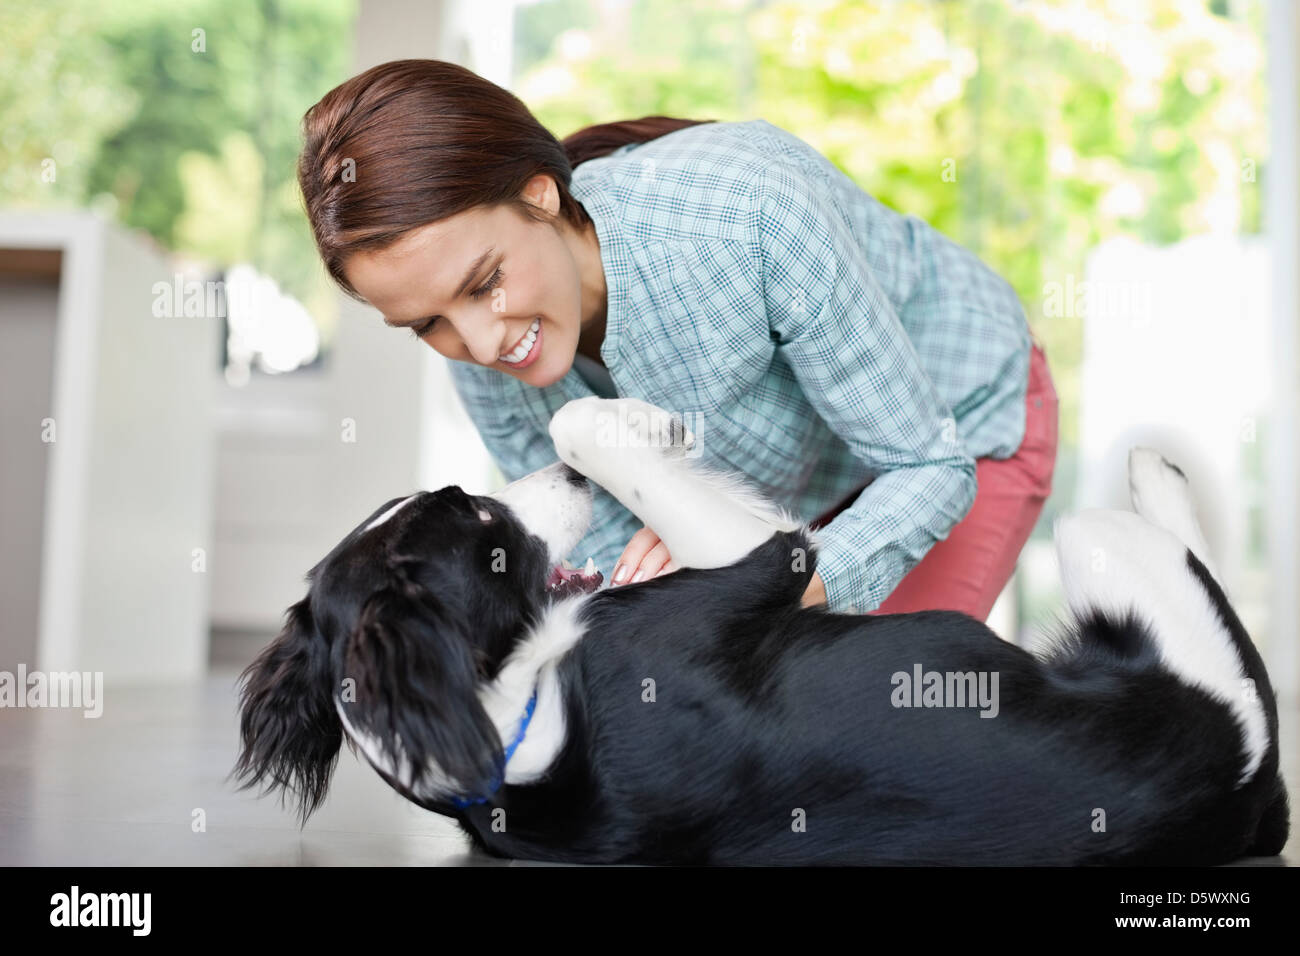 Smiling woman playing with dog Stock Photo